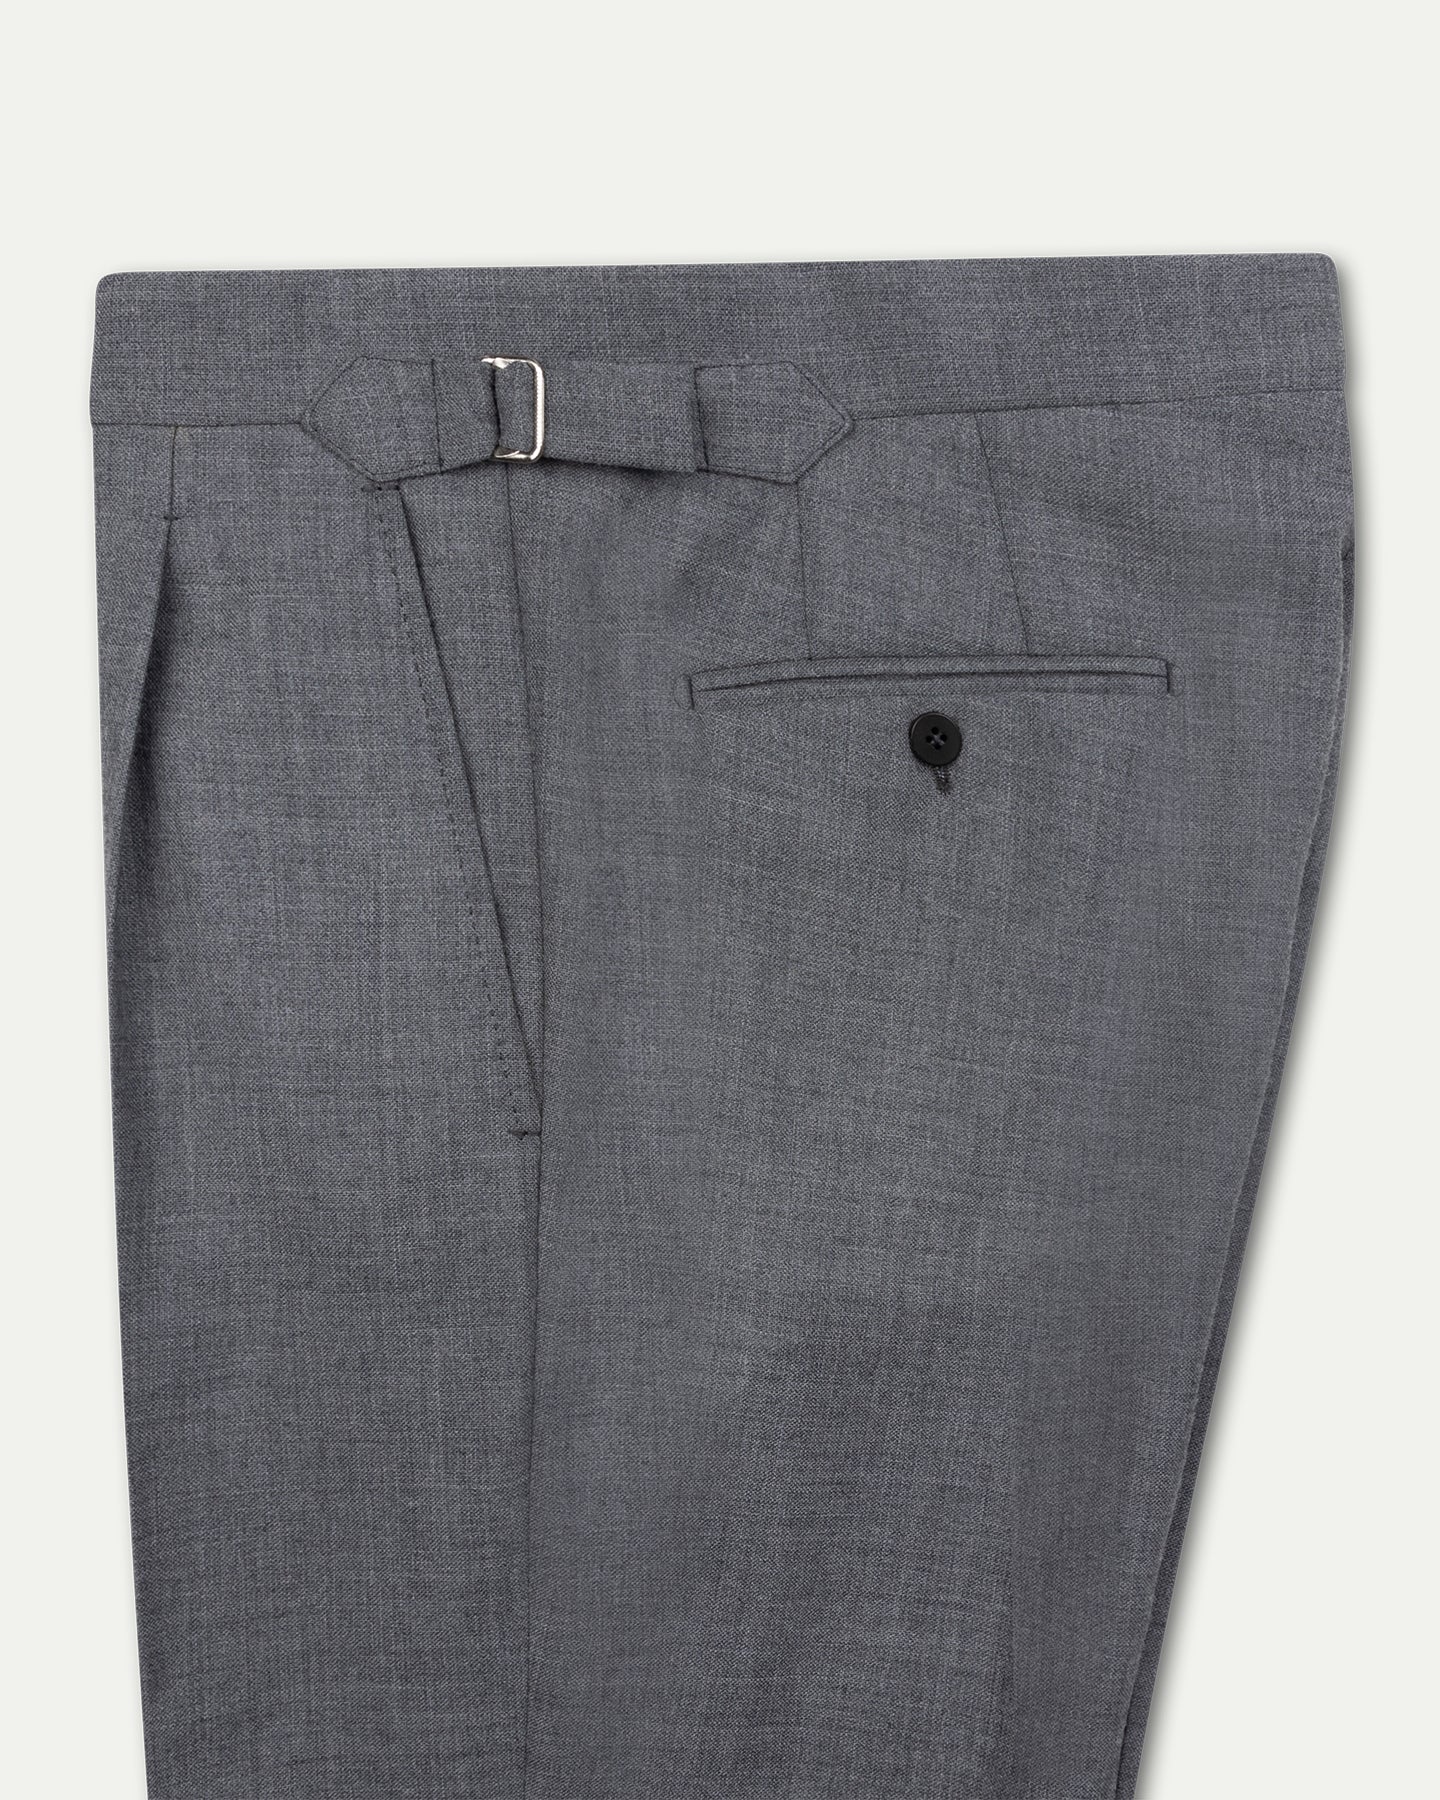 Made-To-Order Trousers in Light Grey Fresco